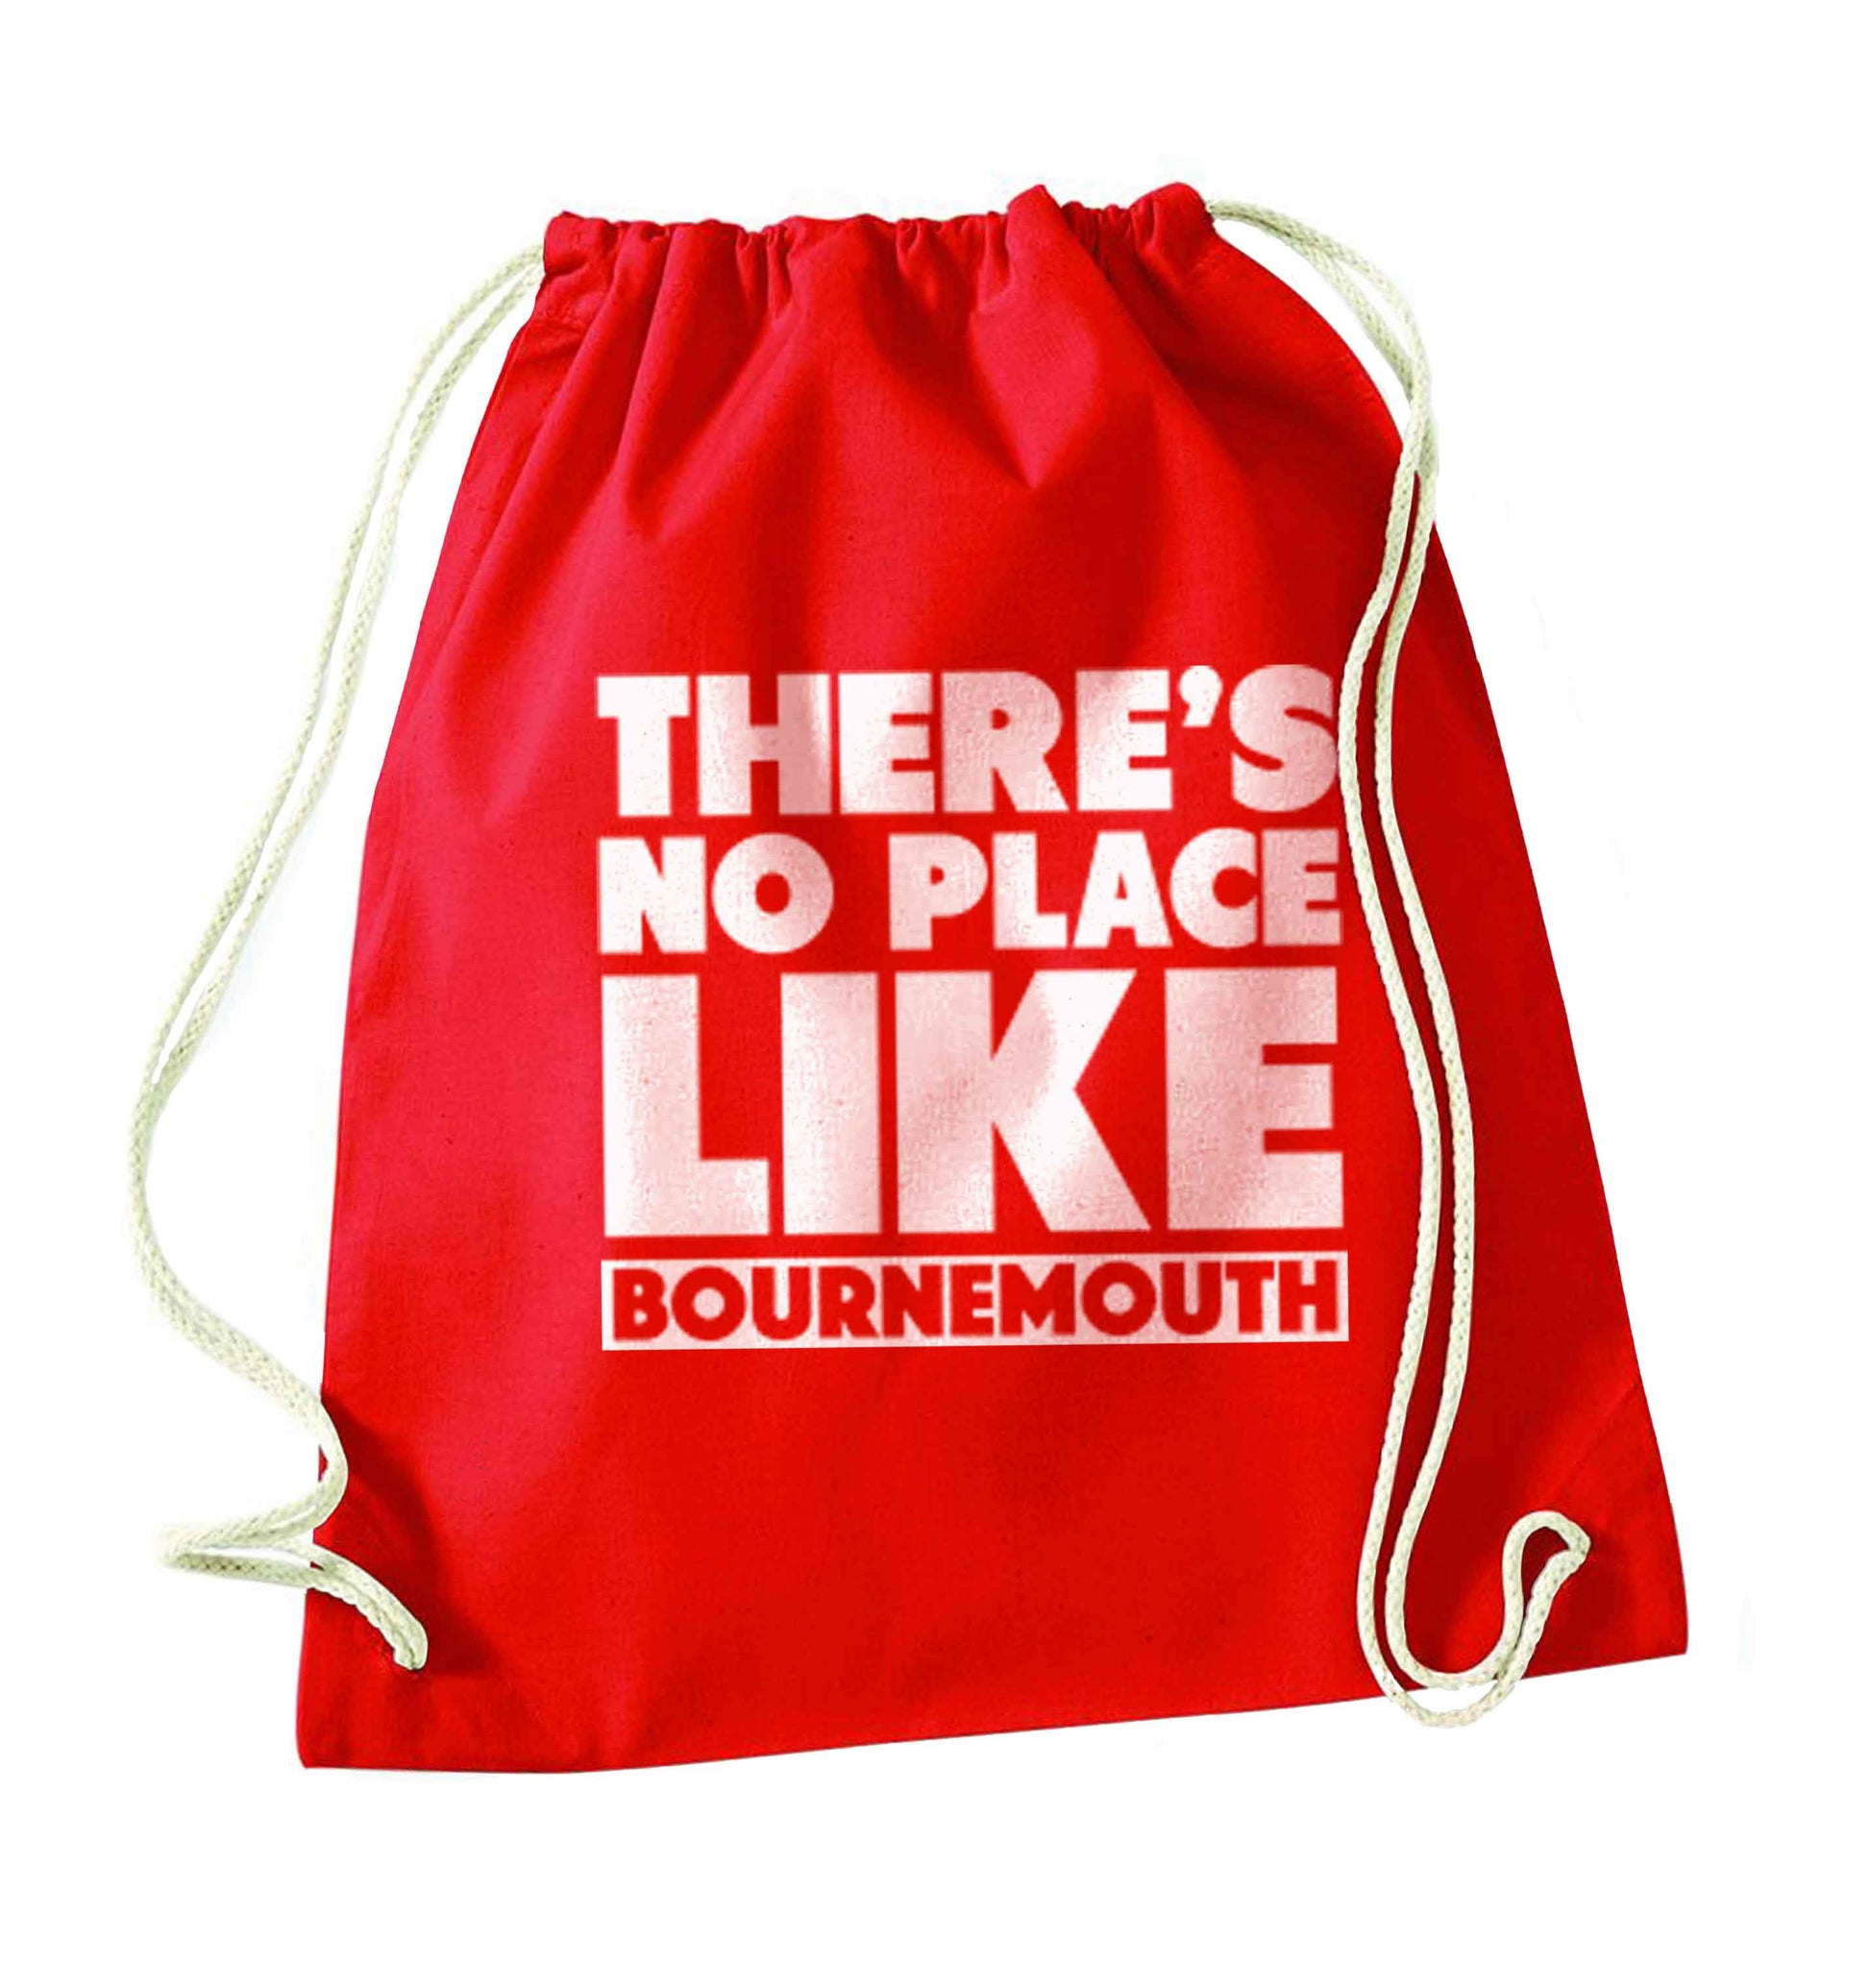 There's no place like Bournemouth red drawstring bag 